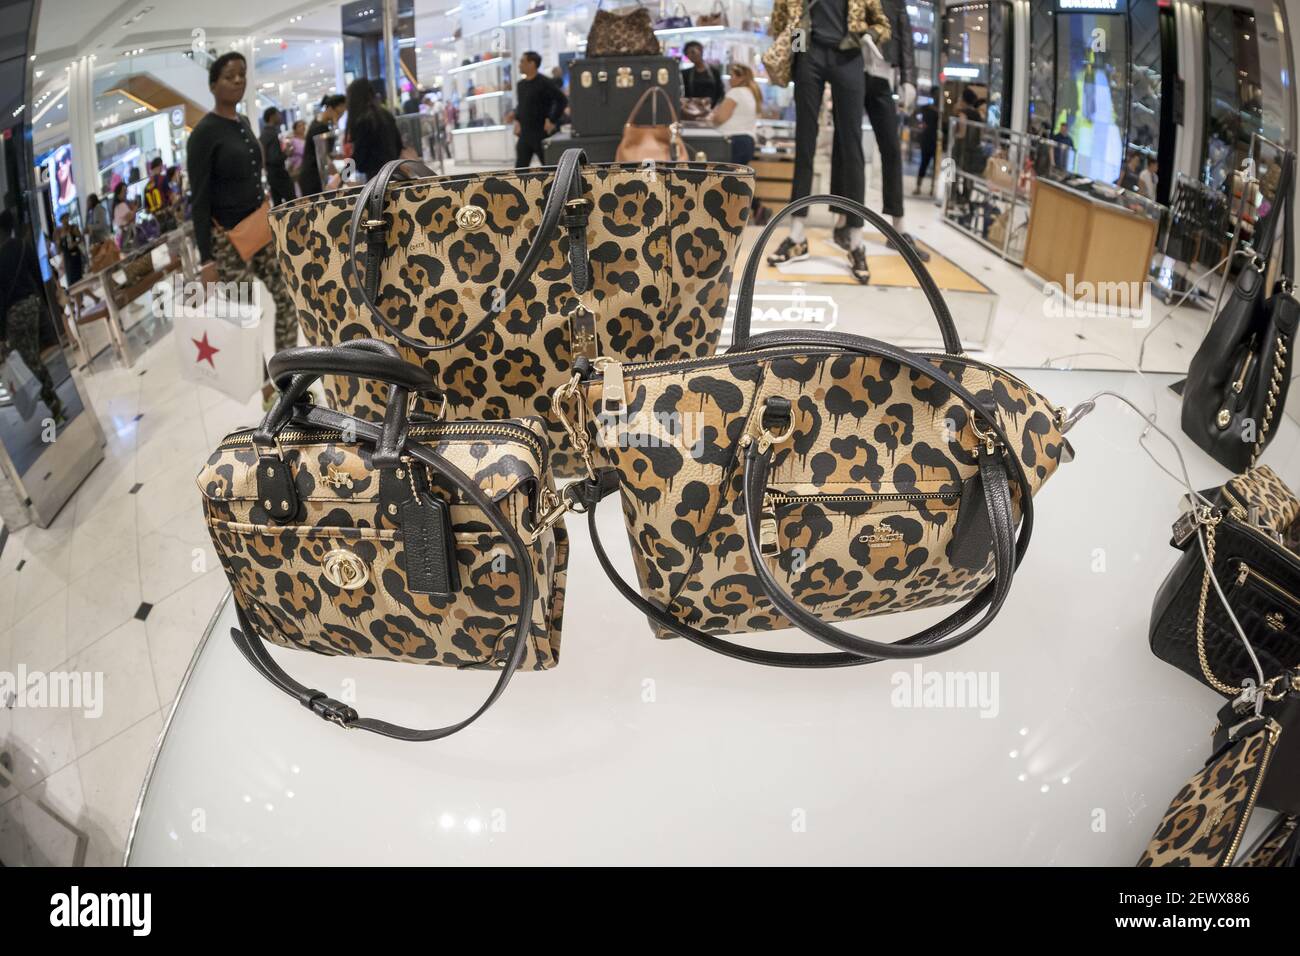 Coach handbags on display at the Coach boutique within Macy's in New York  on Tuesday, August 4, 2015. A tractor trailer containing $500,000 worth of  Coach handbags was stolen from the SalSon